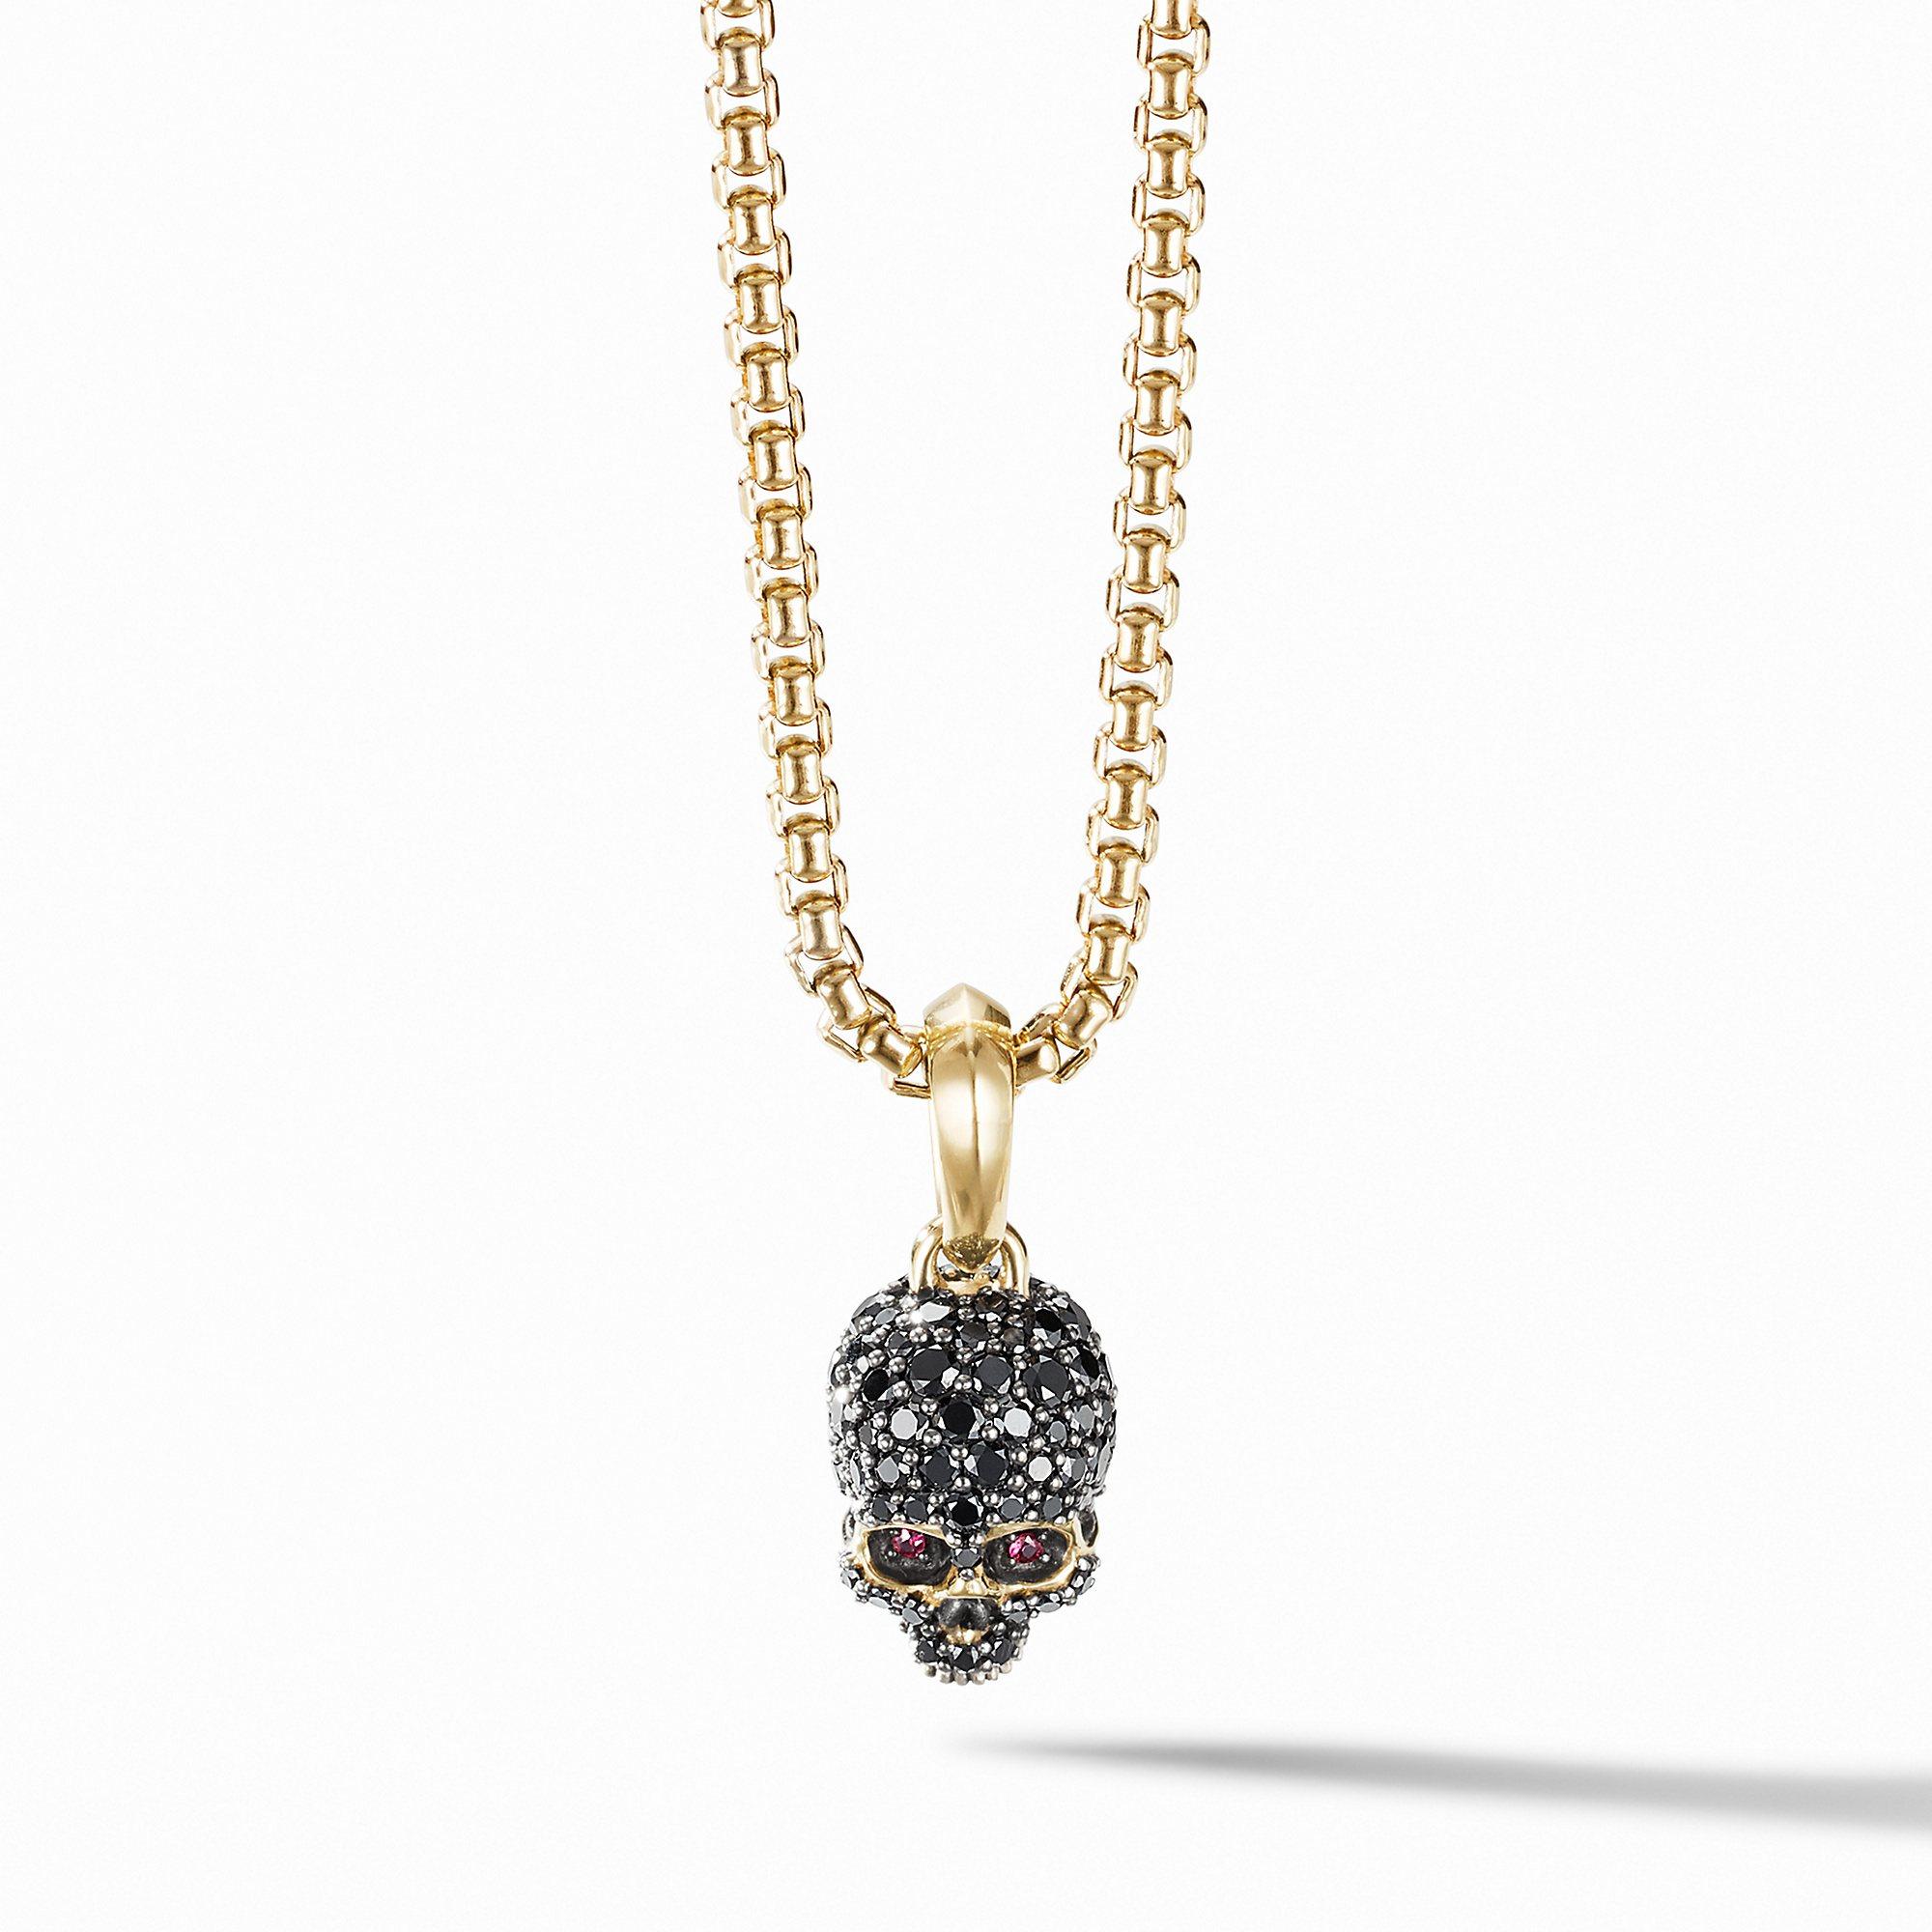 David Yurman Skull Amulet with Full Pave Black Diamonds, Rubies and 18K Yellow Gold | Front View